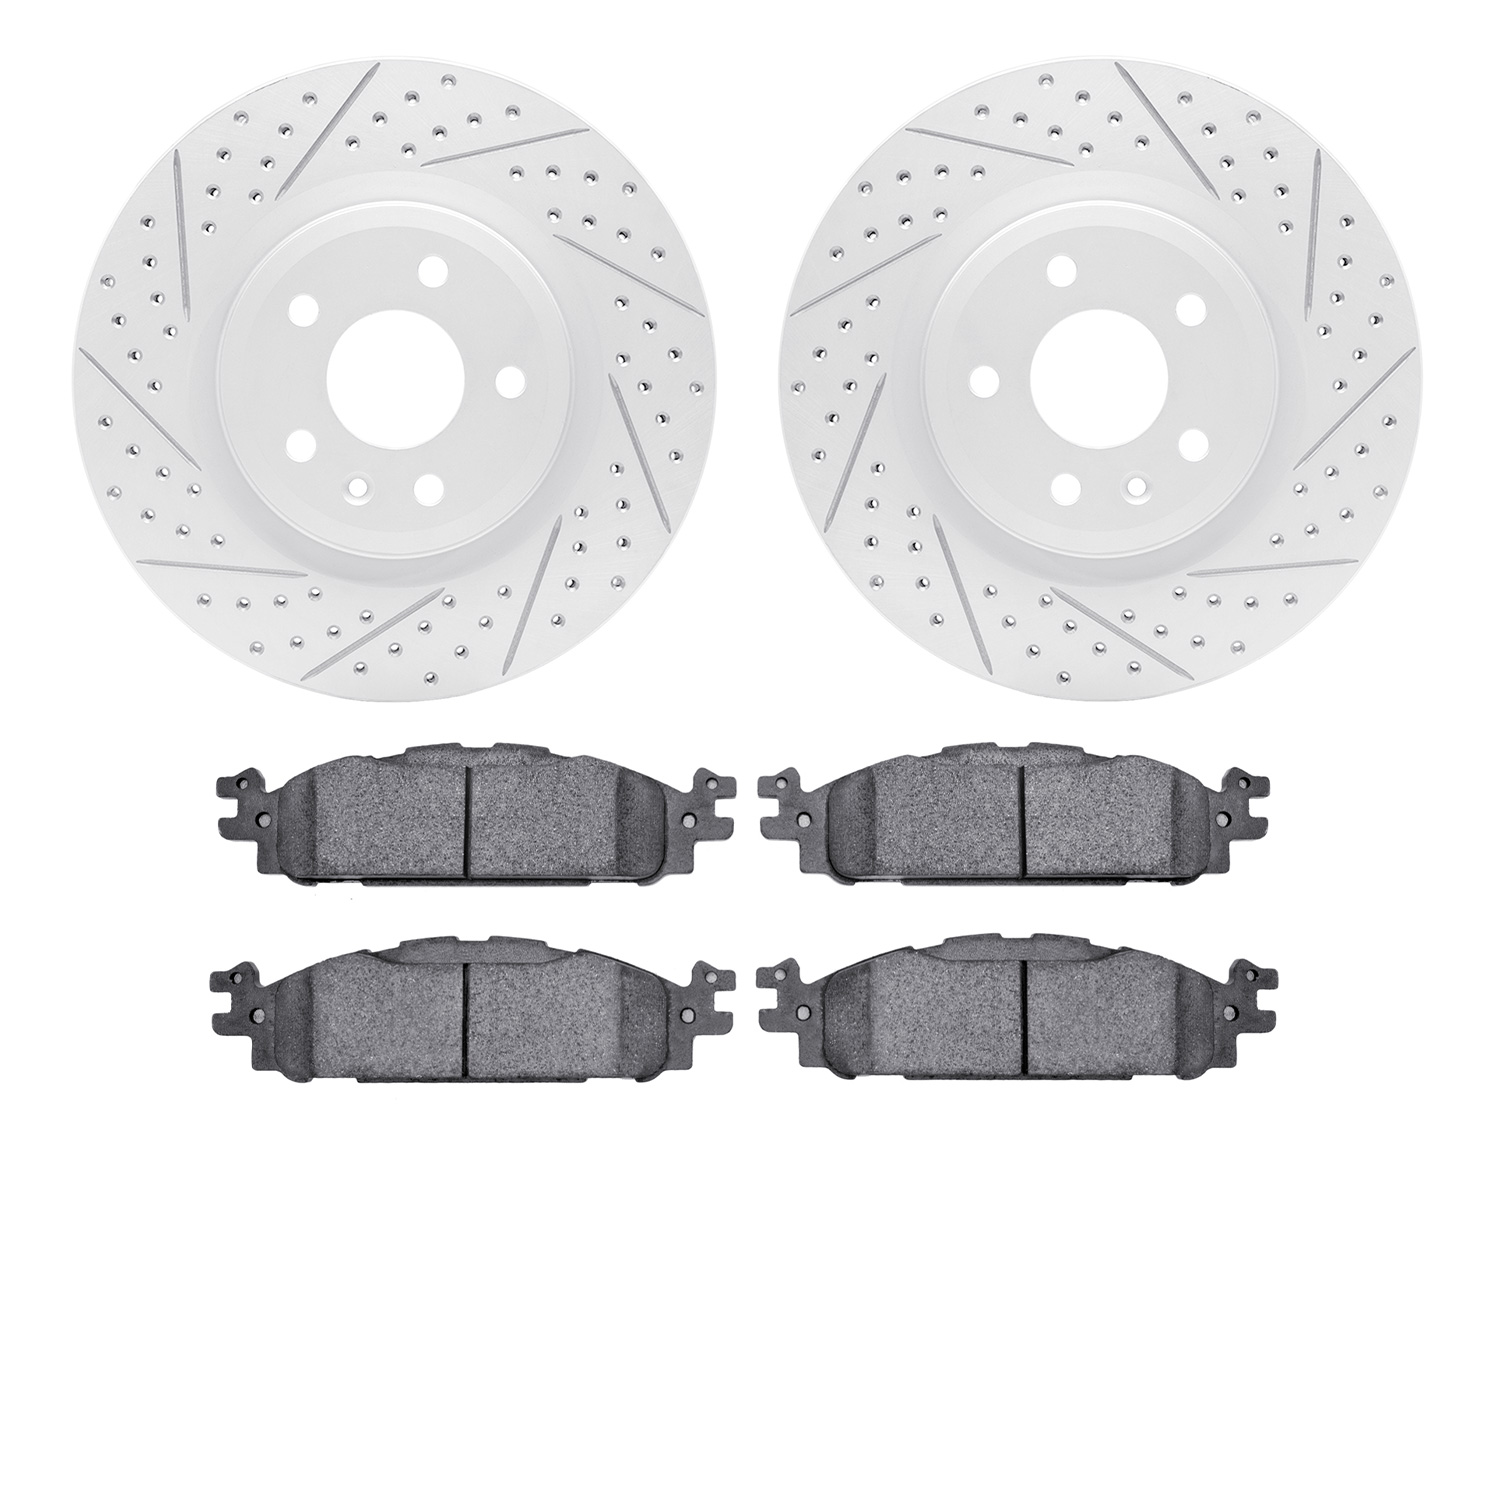 2502-54094 Geoperformance Drilled/Slotted Rotors w/5000 Advanced Brake Pads Kit, 2011-2019 Ford/Lincoln/Mercury/Mazda, Position: